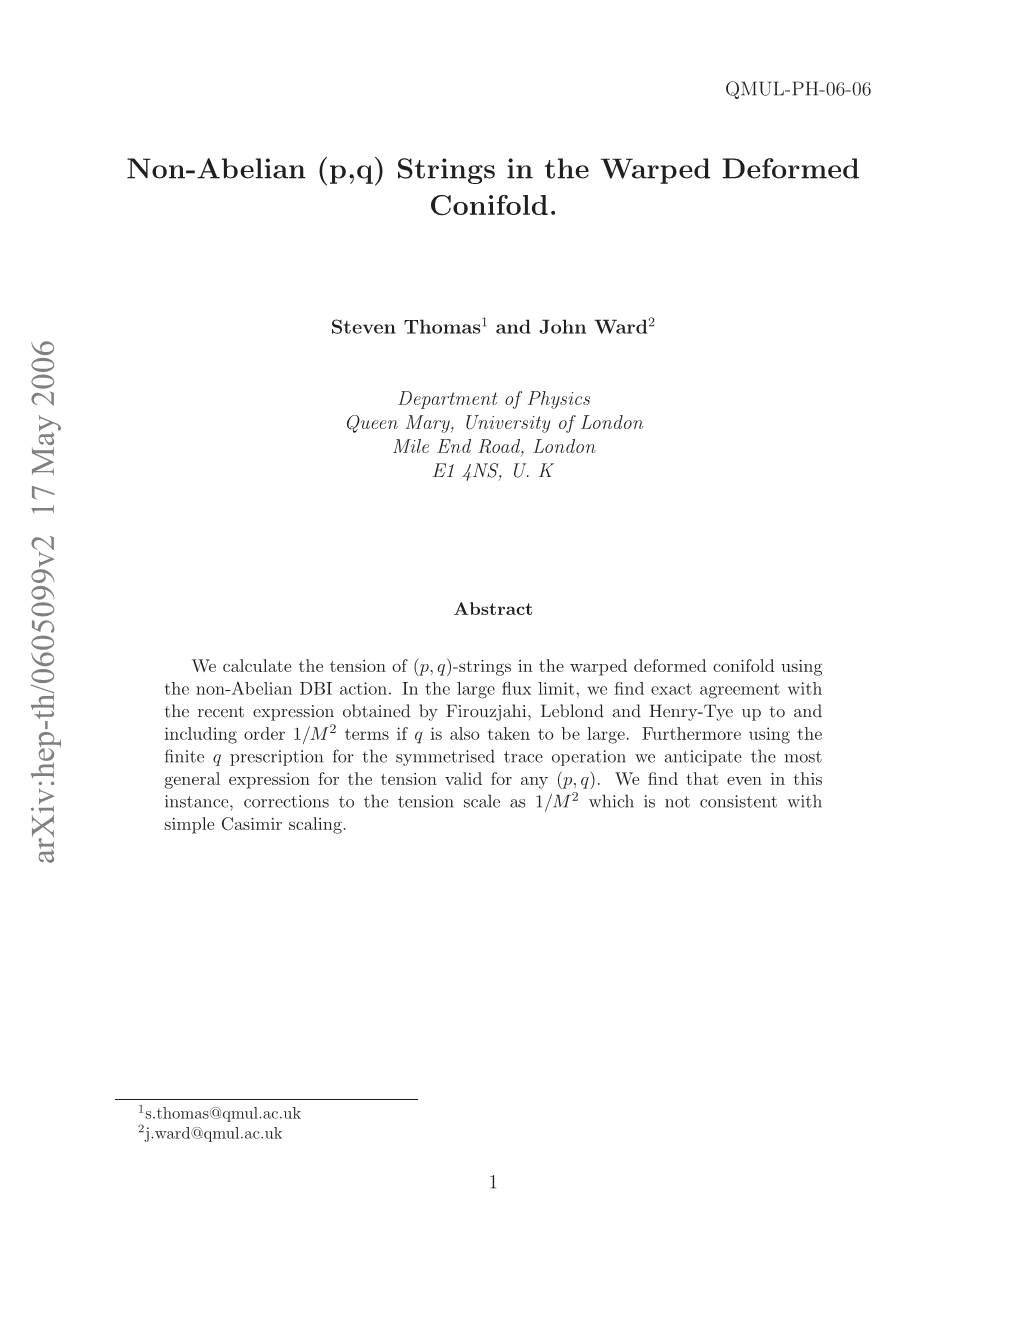 Non-Abelian (P, Q) Strings in the Warped Deformed Conifold